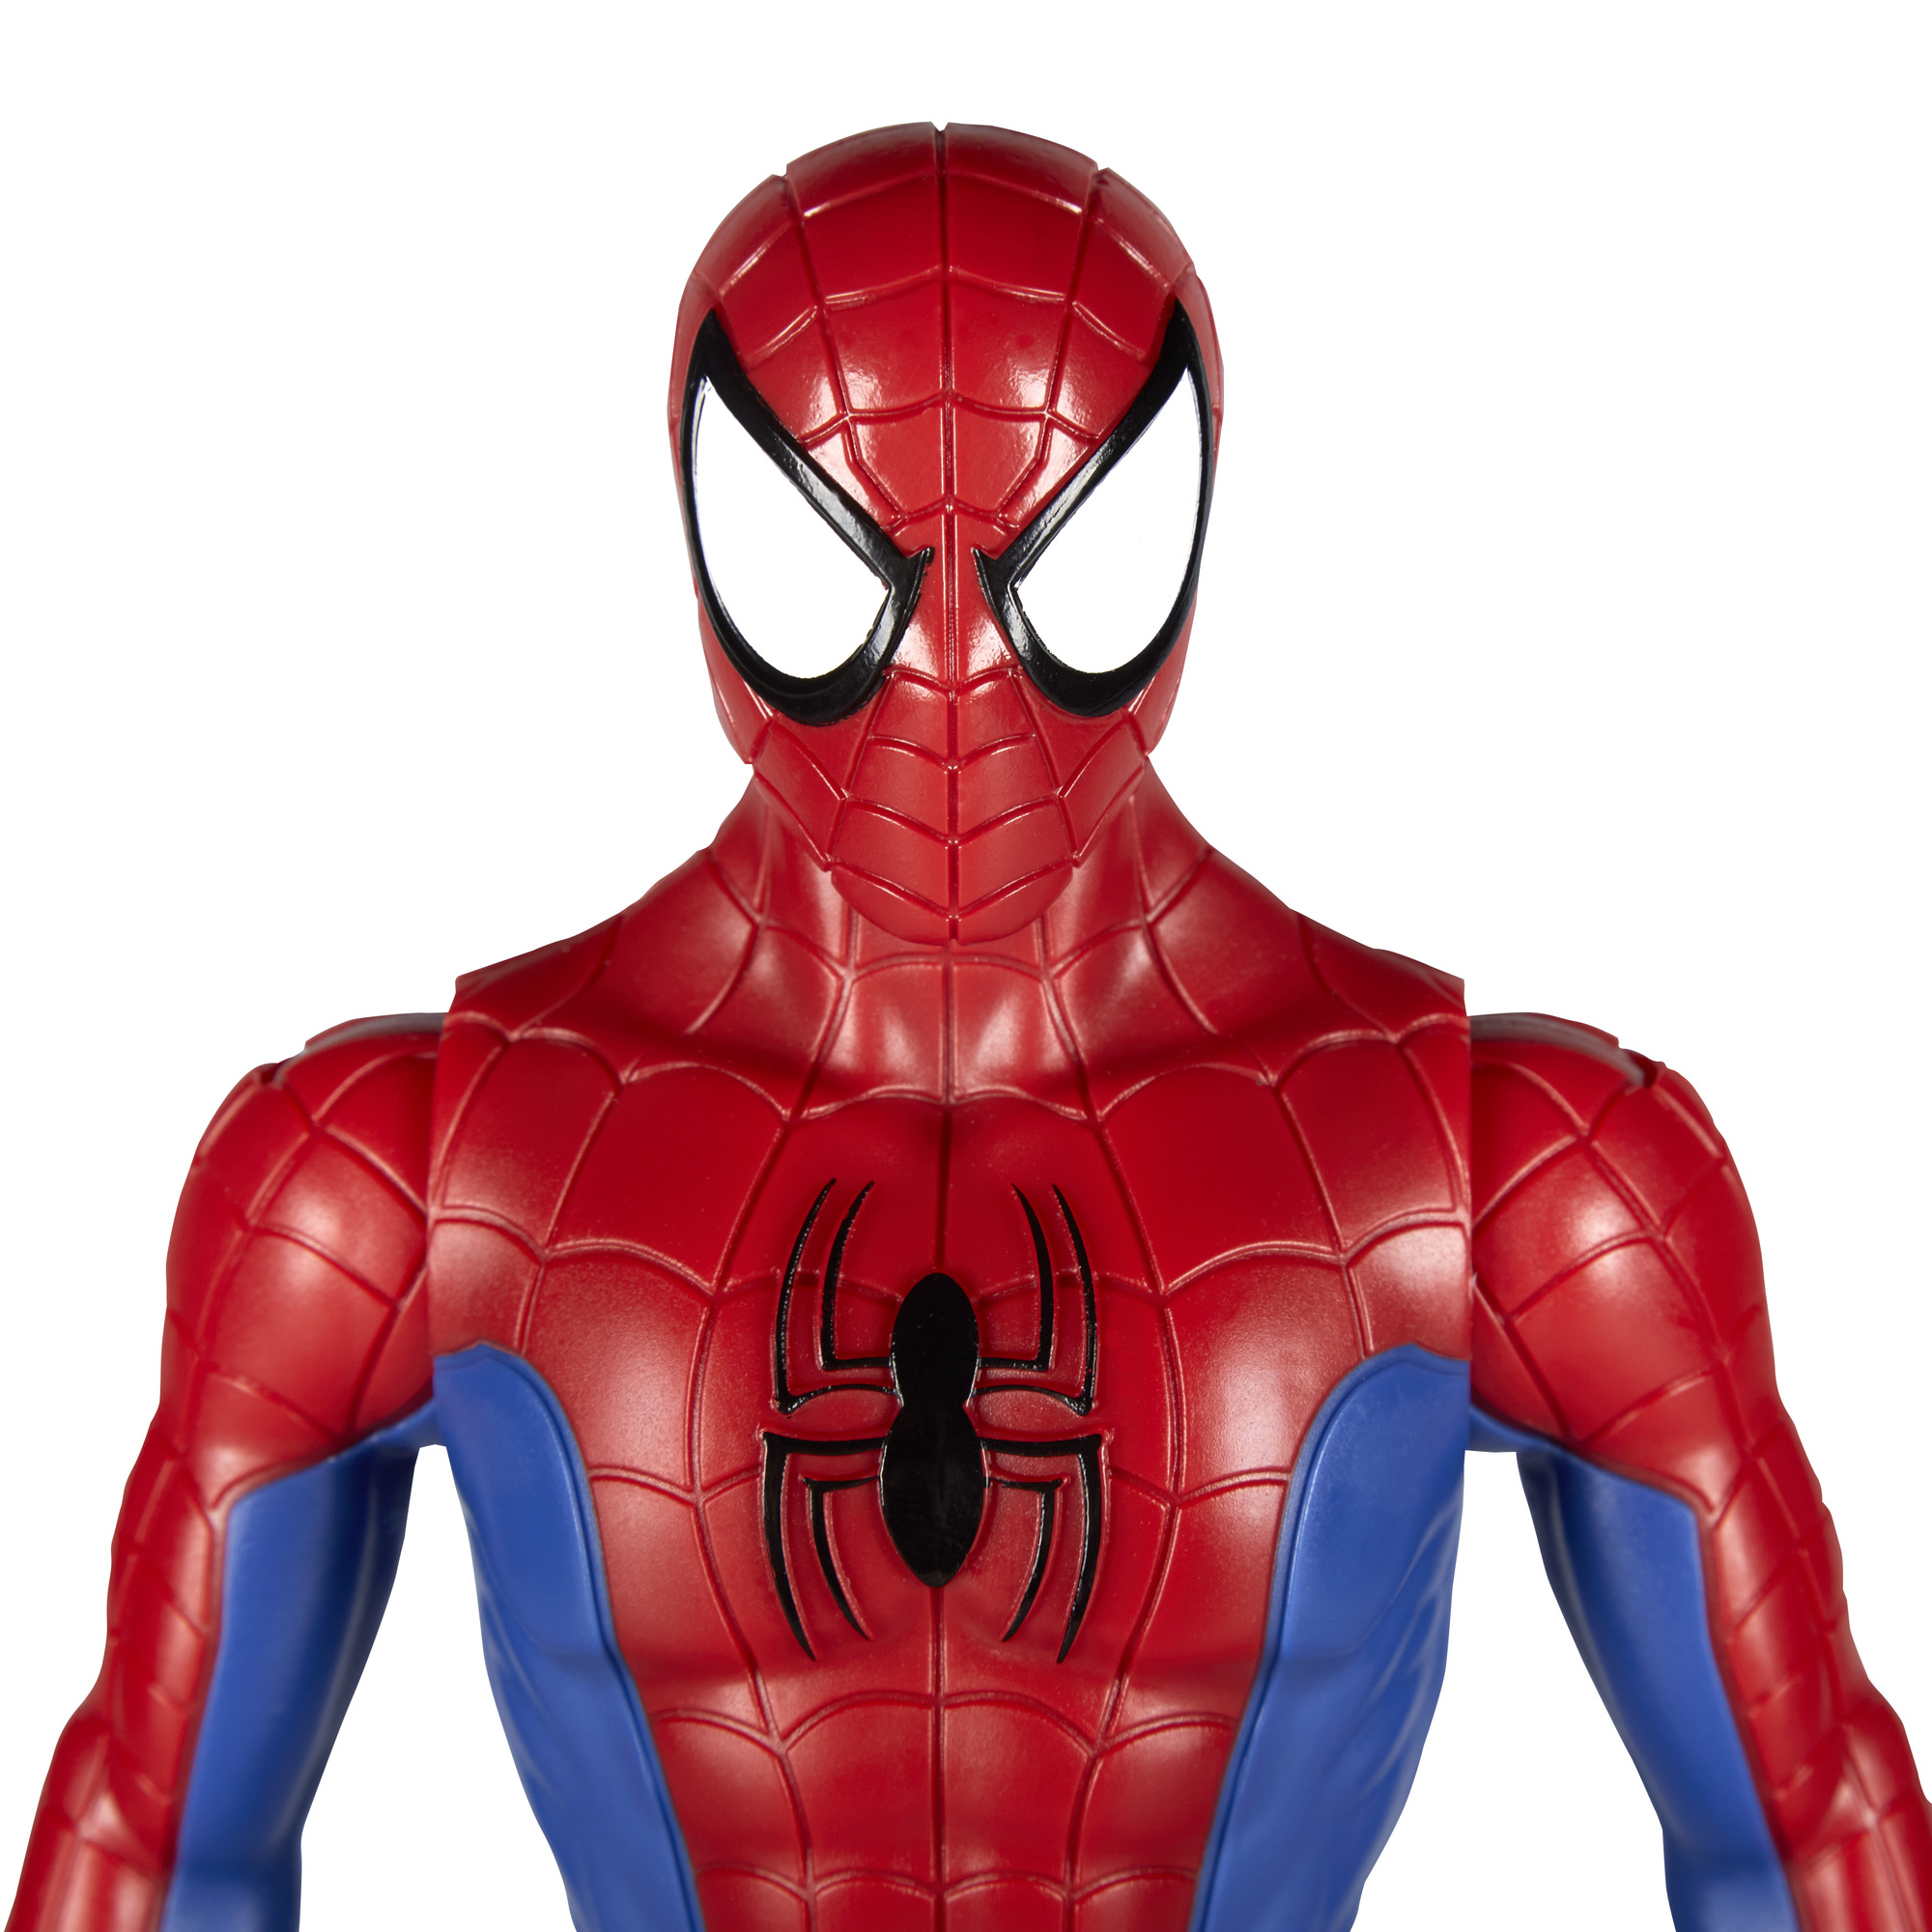 Marvel Spiderman: Titan Hero Series Spiderman Kids Toy Action Figure for Boys and Girls (13”) - image 4 of 16